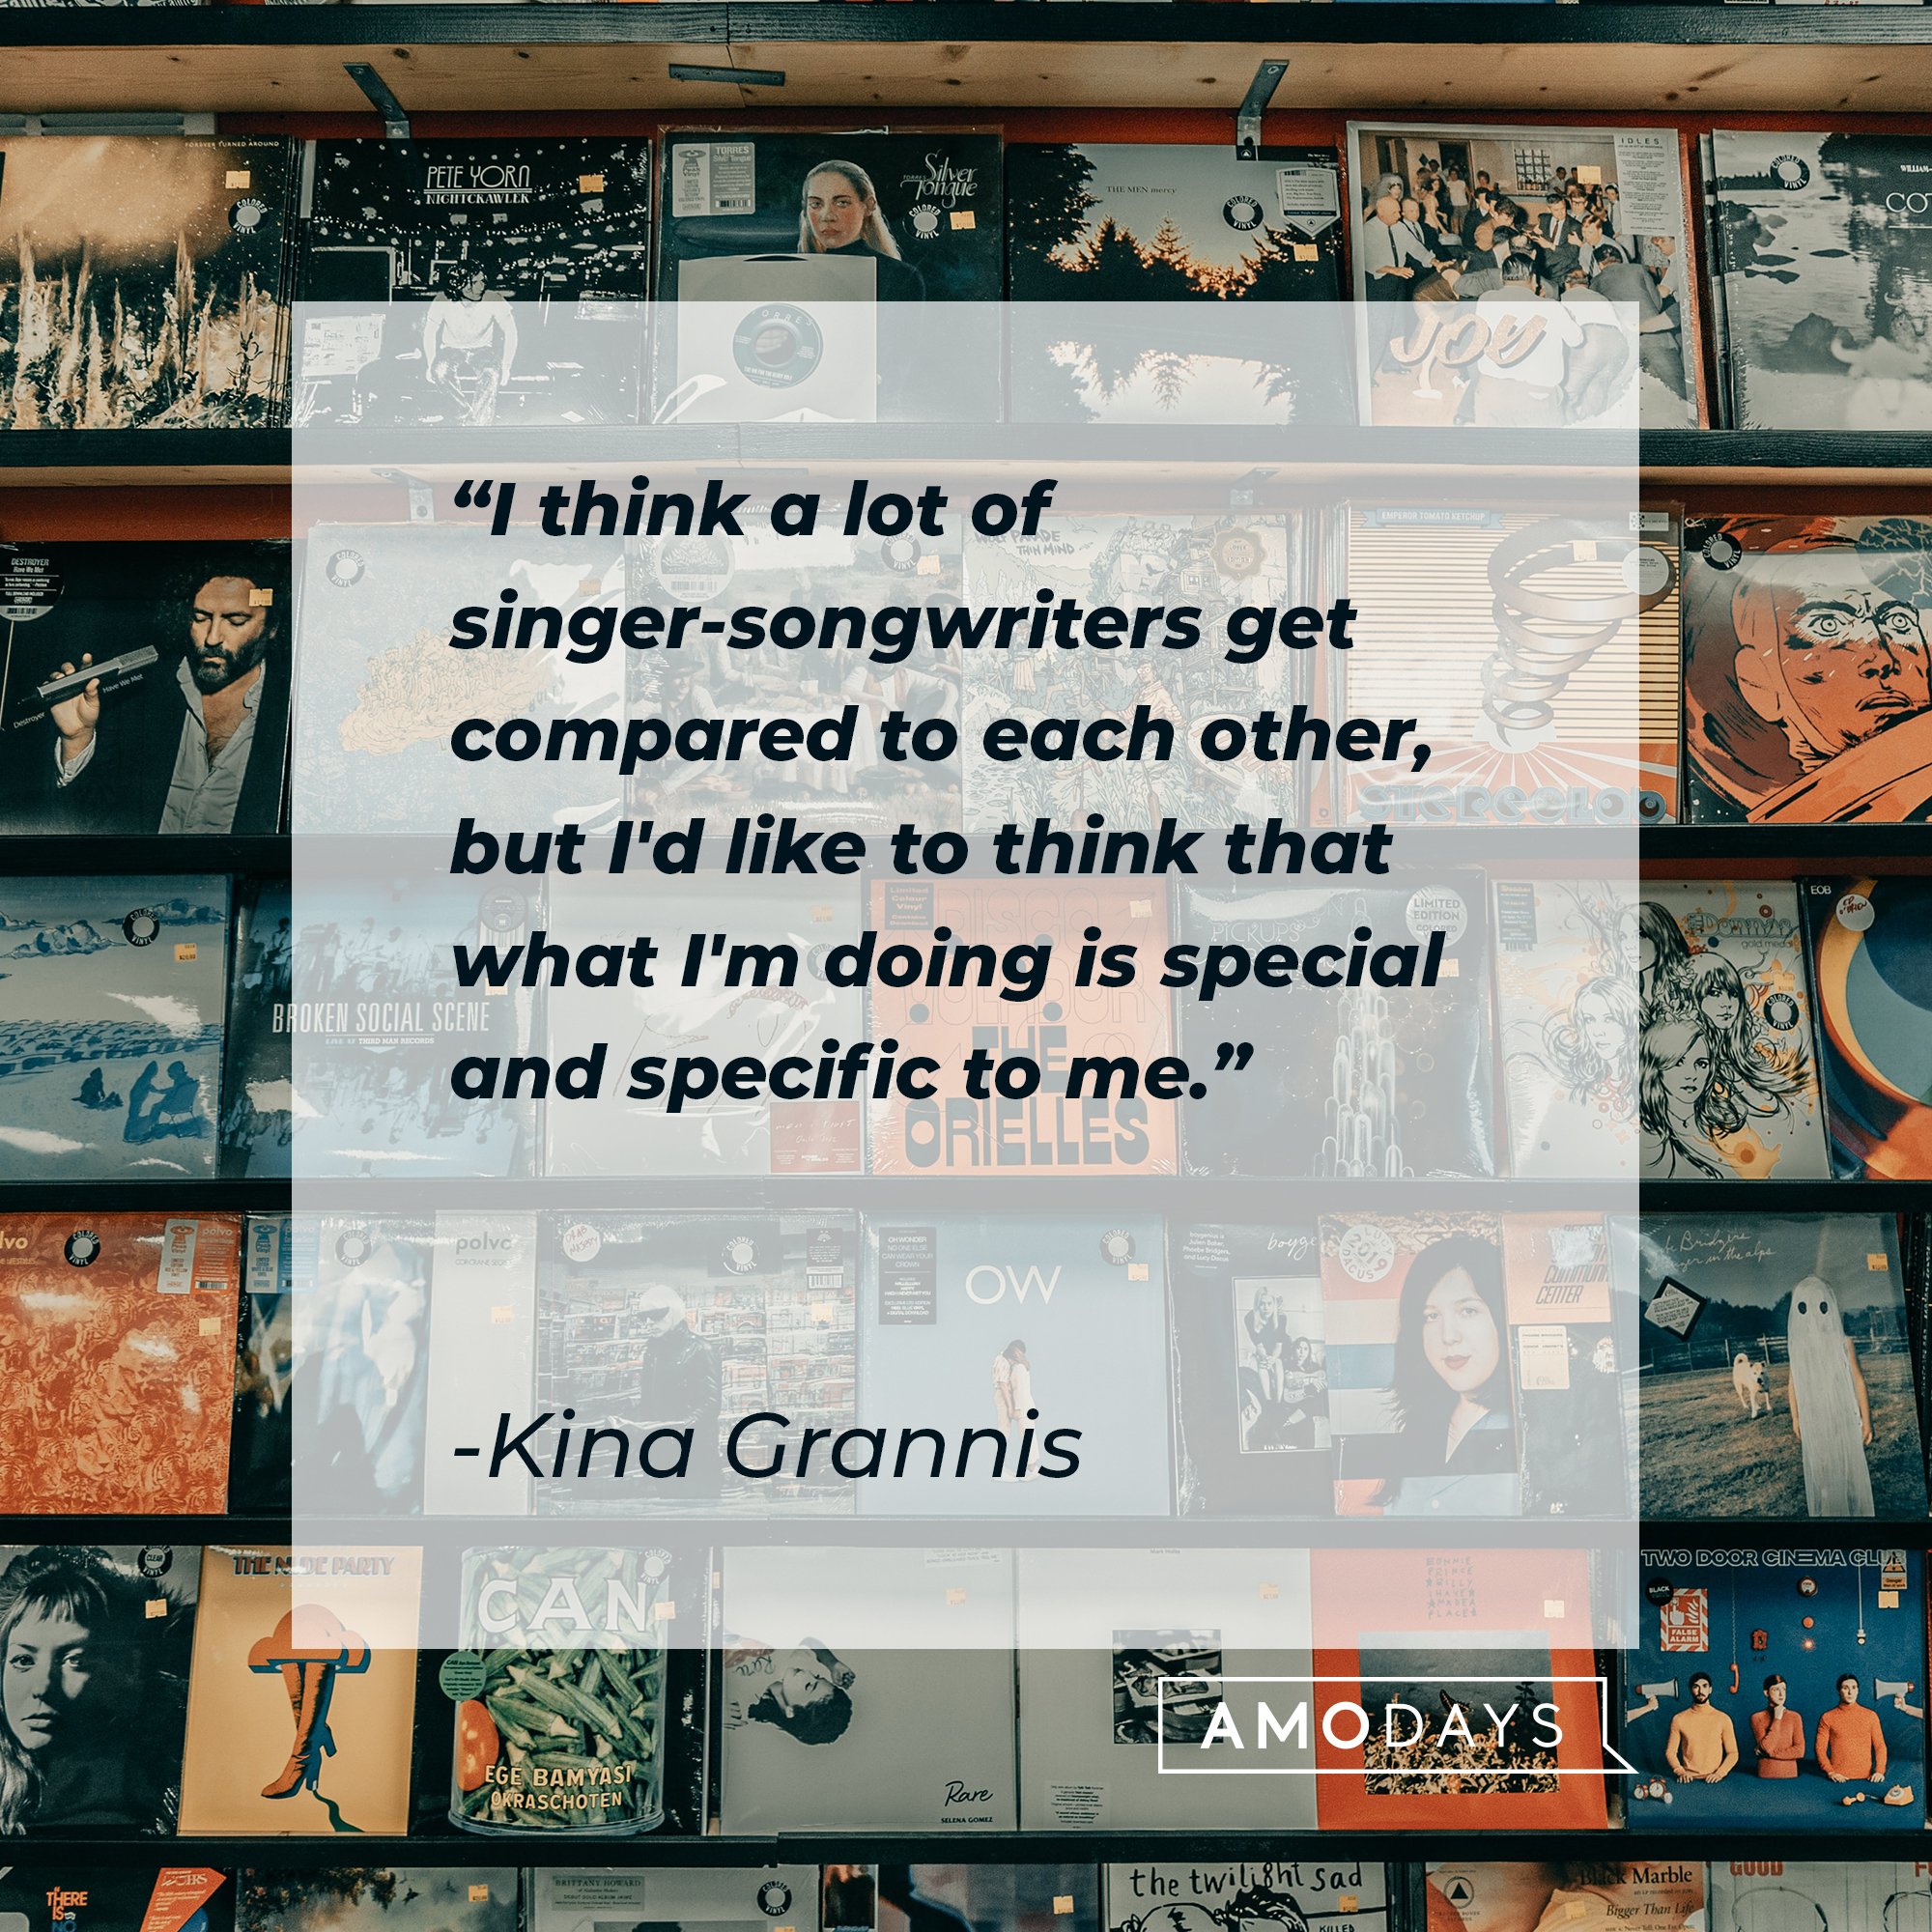 Kina Grannis’ quote: "I think a lot of singer-songwriters get compared to each other, but I'd like to think that what I'm doing is special and specific to me."  | Image: AmoDays 